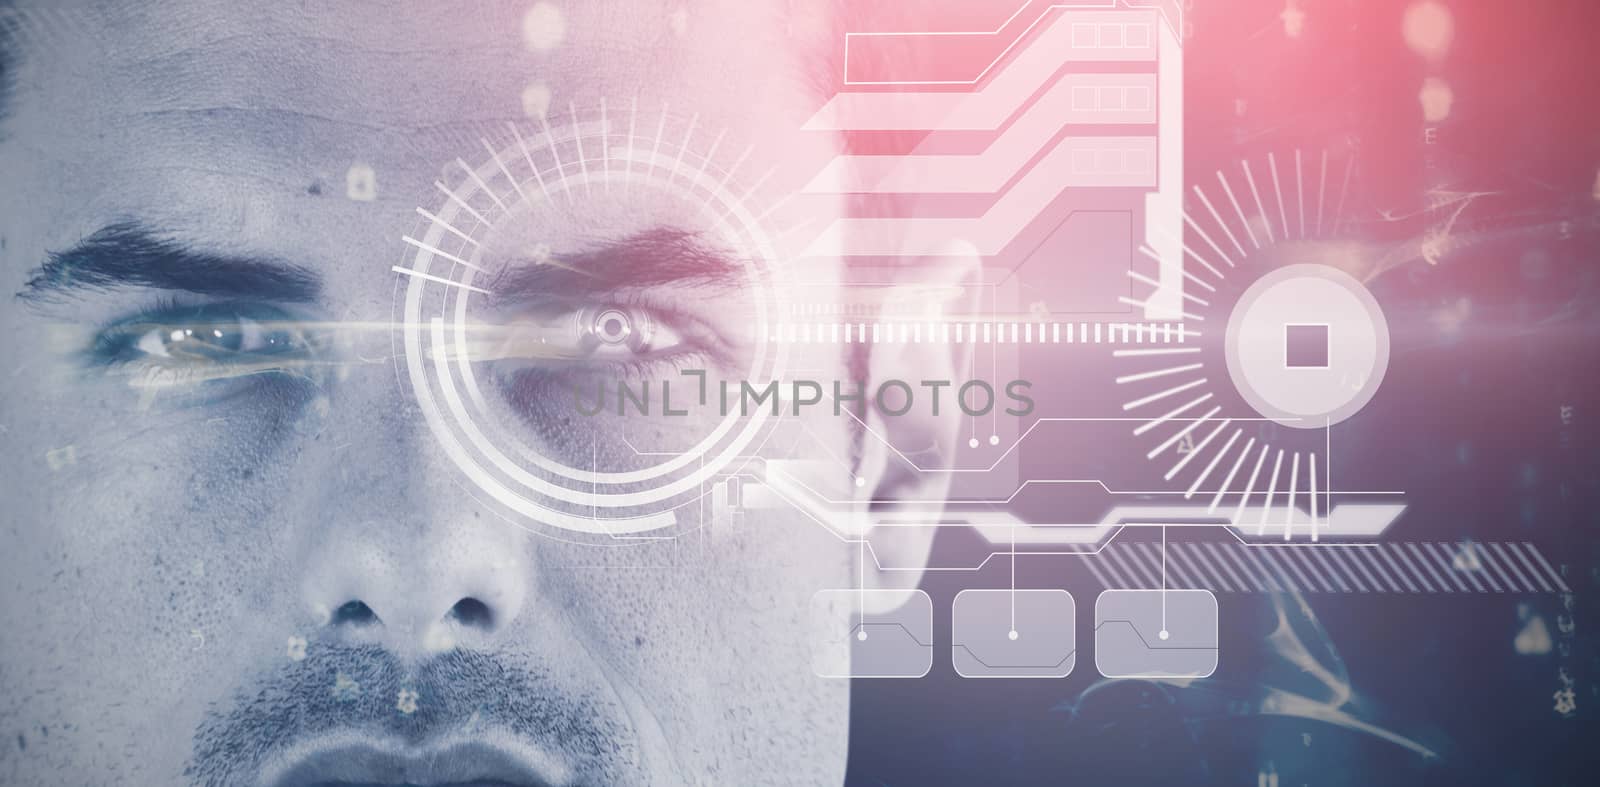 3D image of close up portrait of handsome man against digitally generated image of abstract pattern